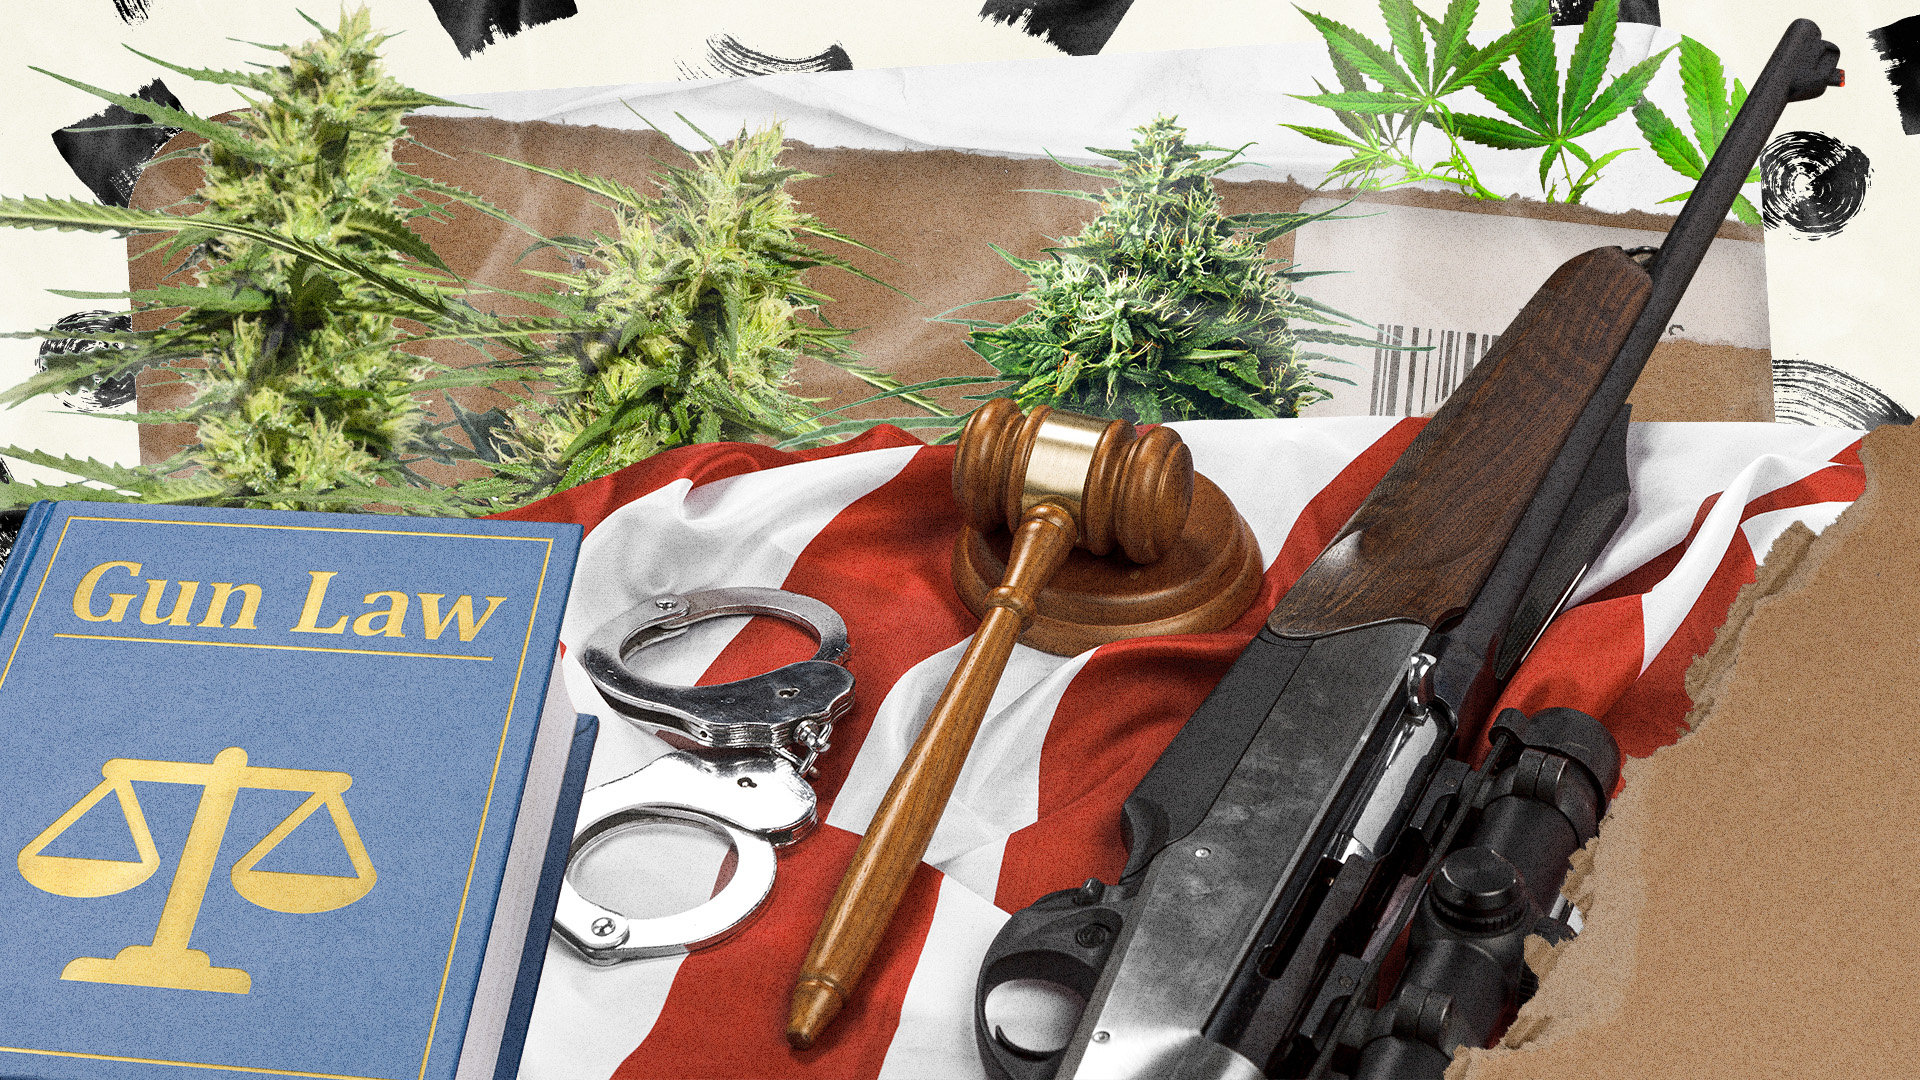 SD’s “Advisory Law”  and the MMJ Patient-Gun Ownership Debate